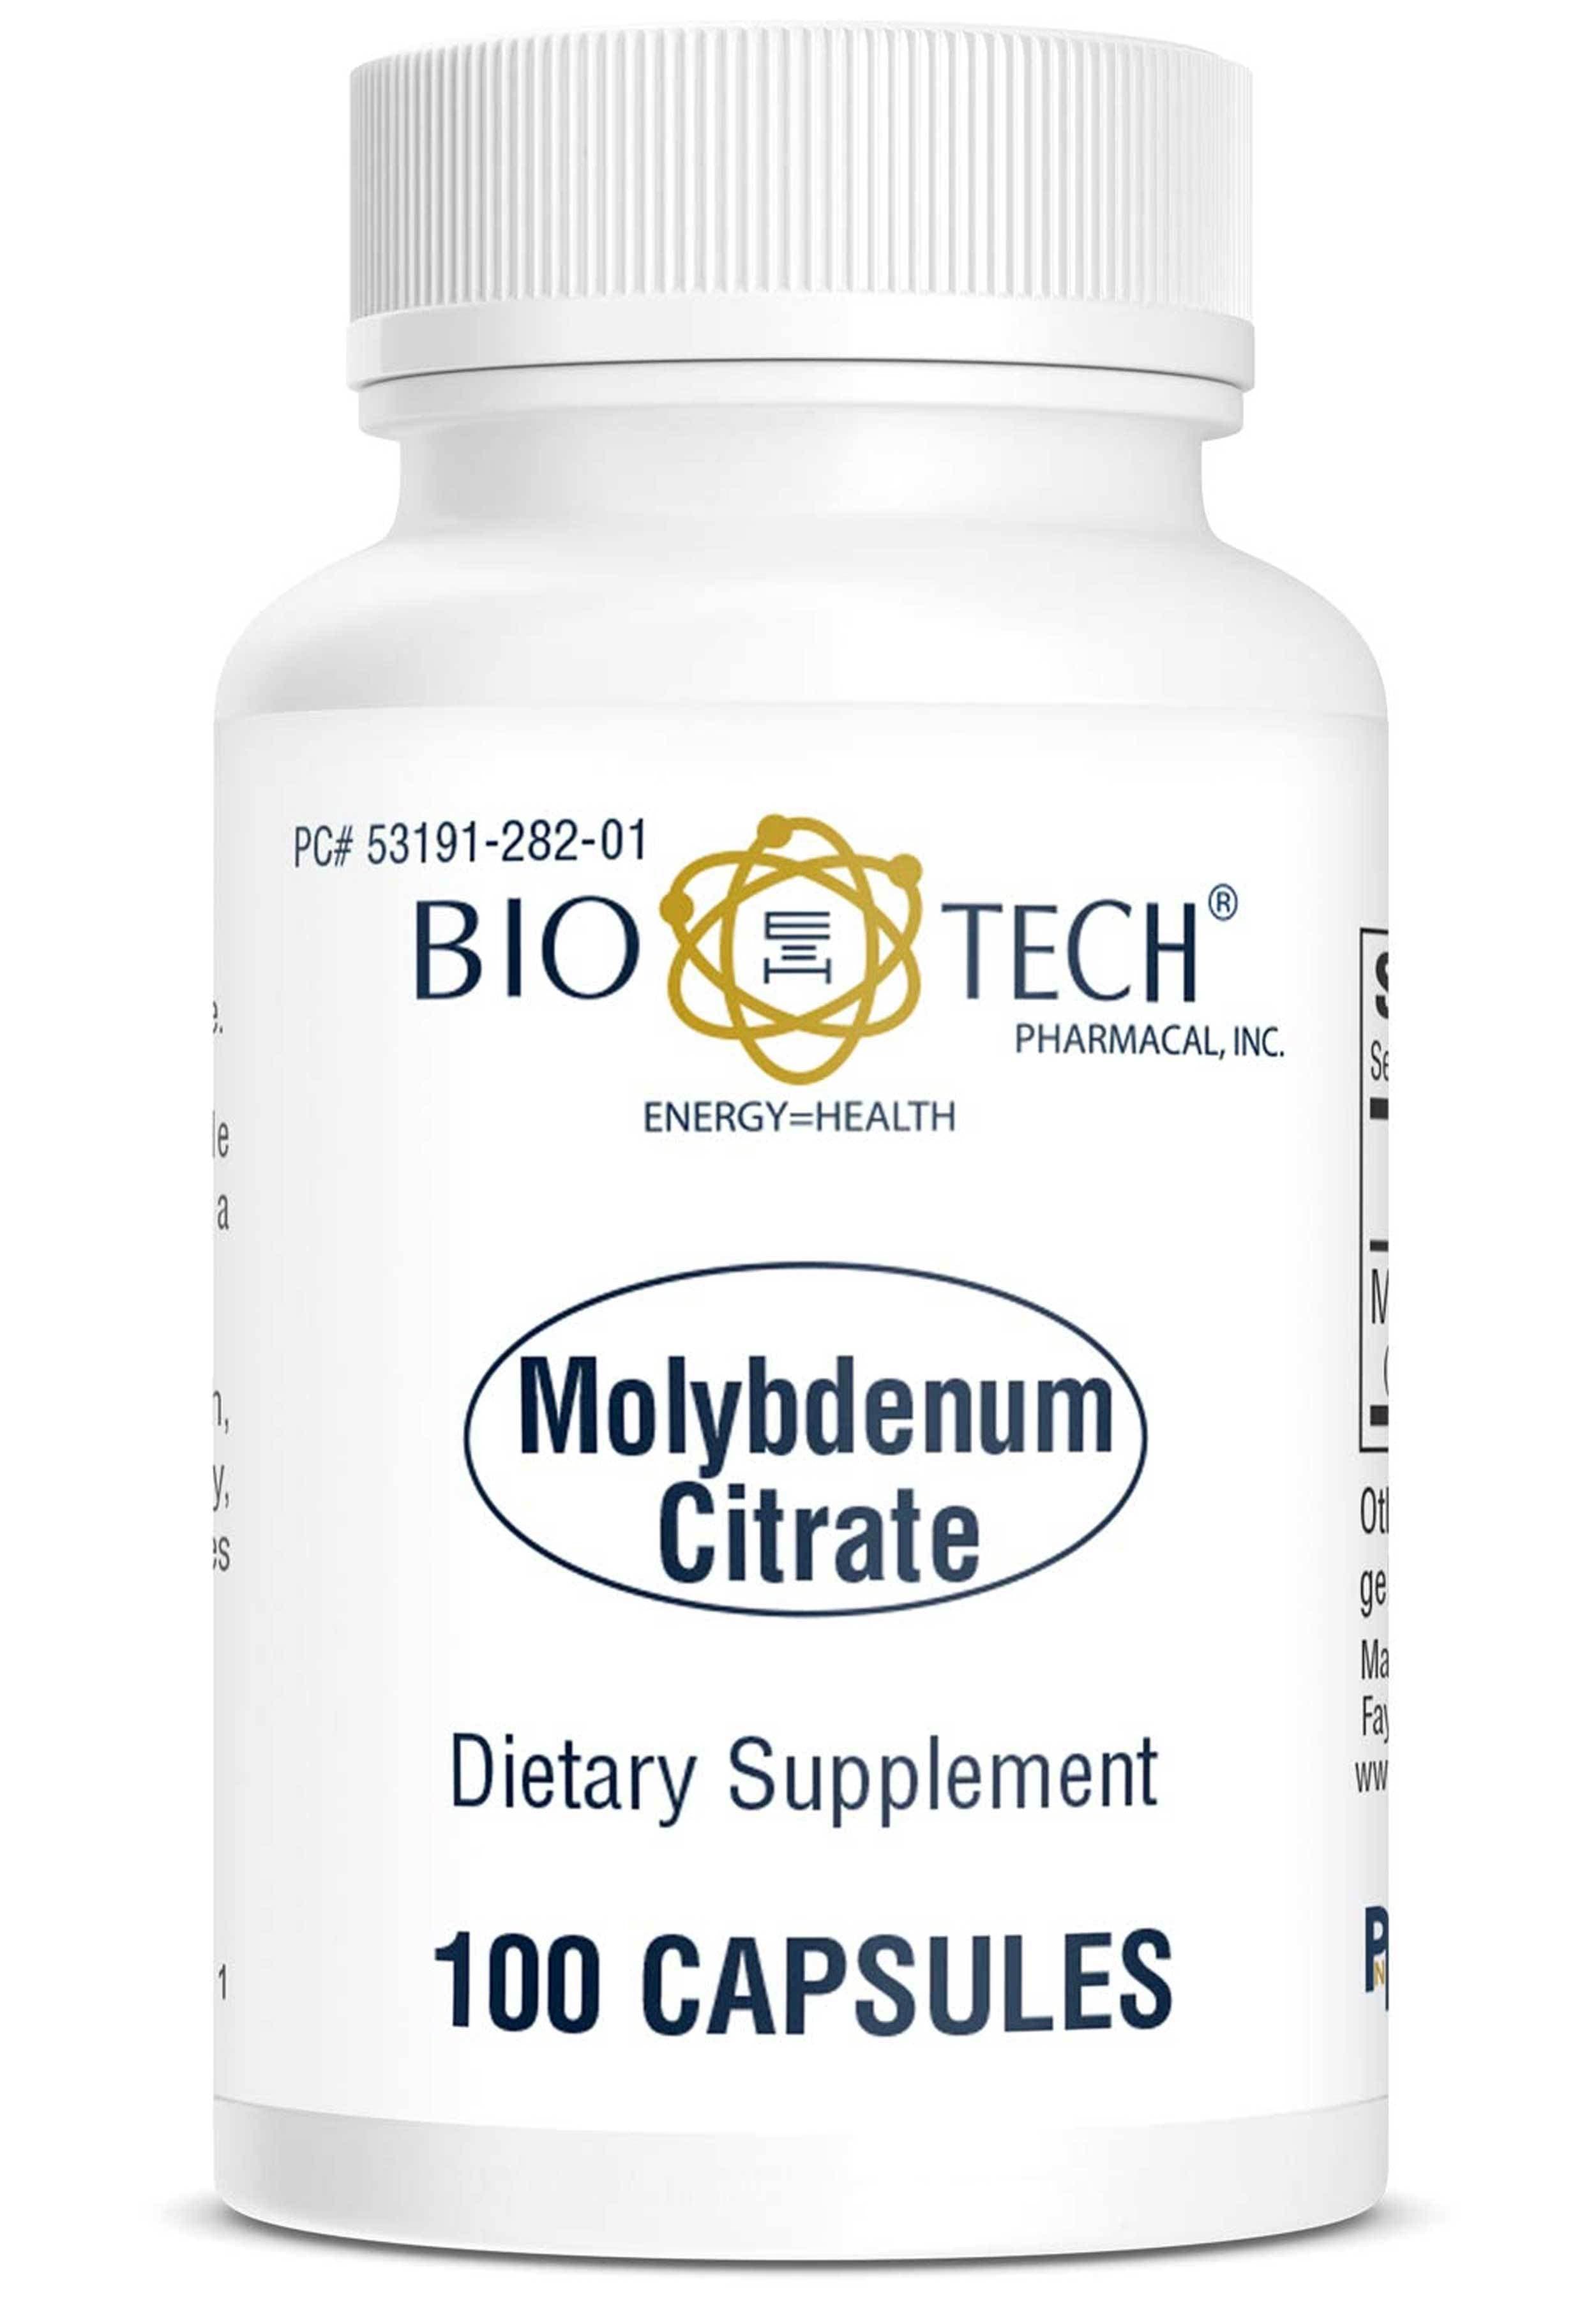 Bio-Tech Pharmacal Molybdenum Citrate